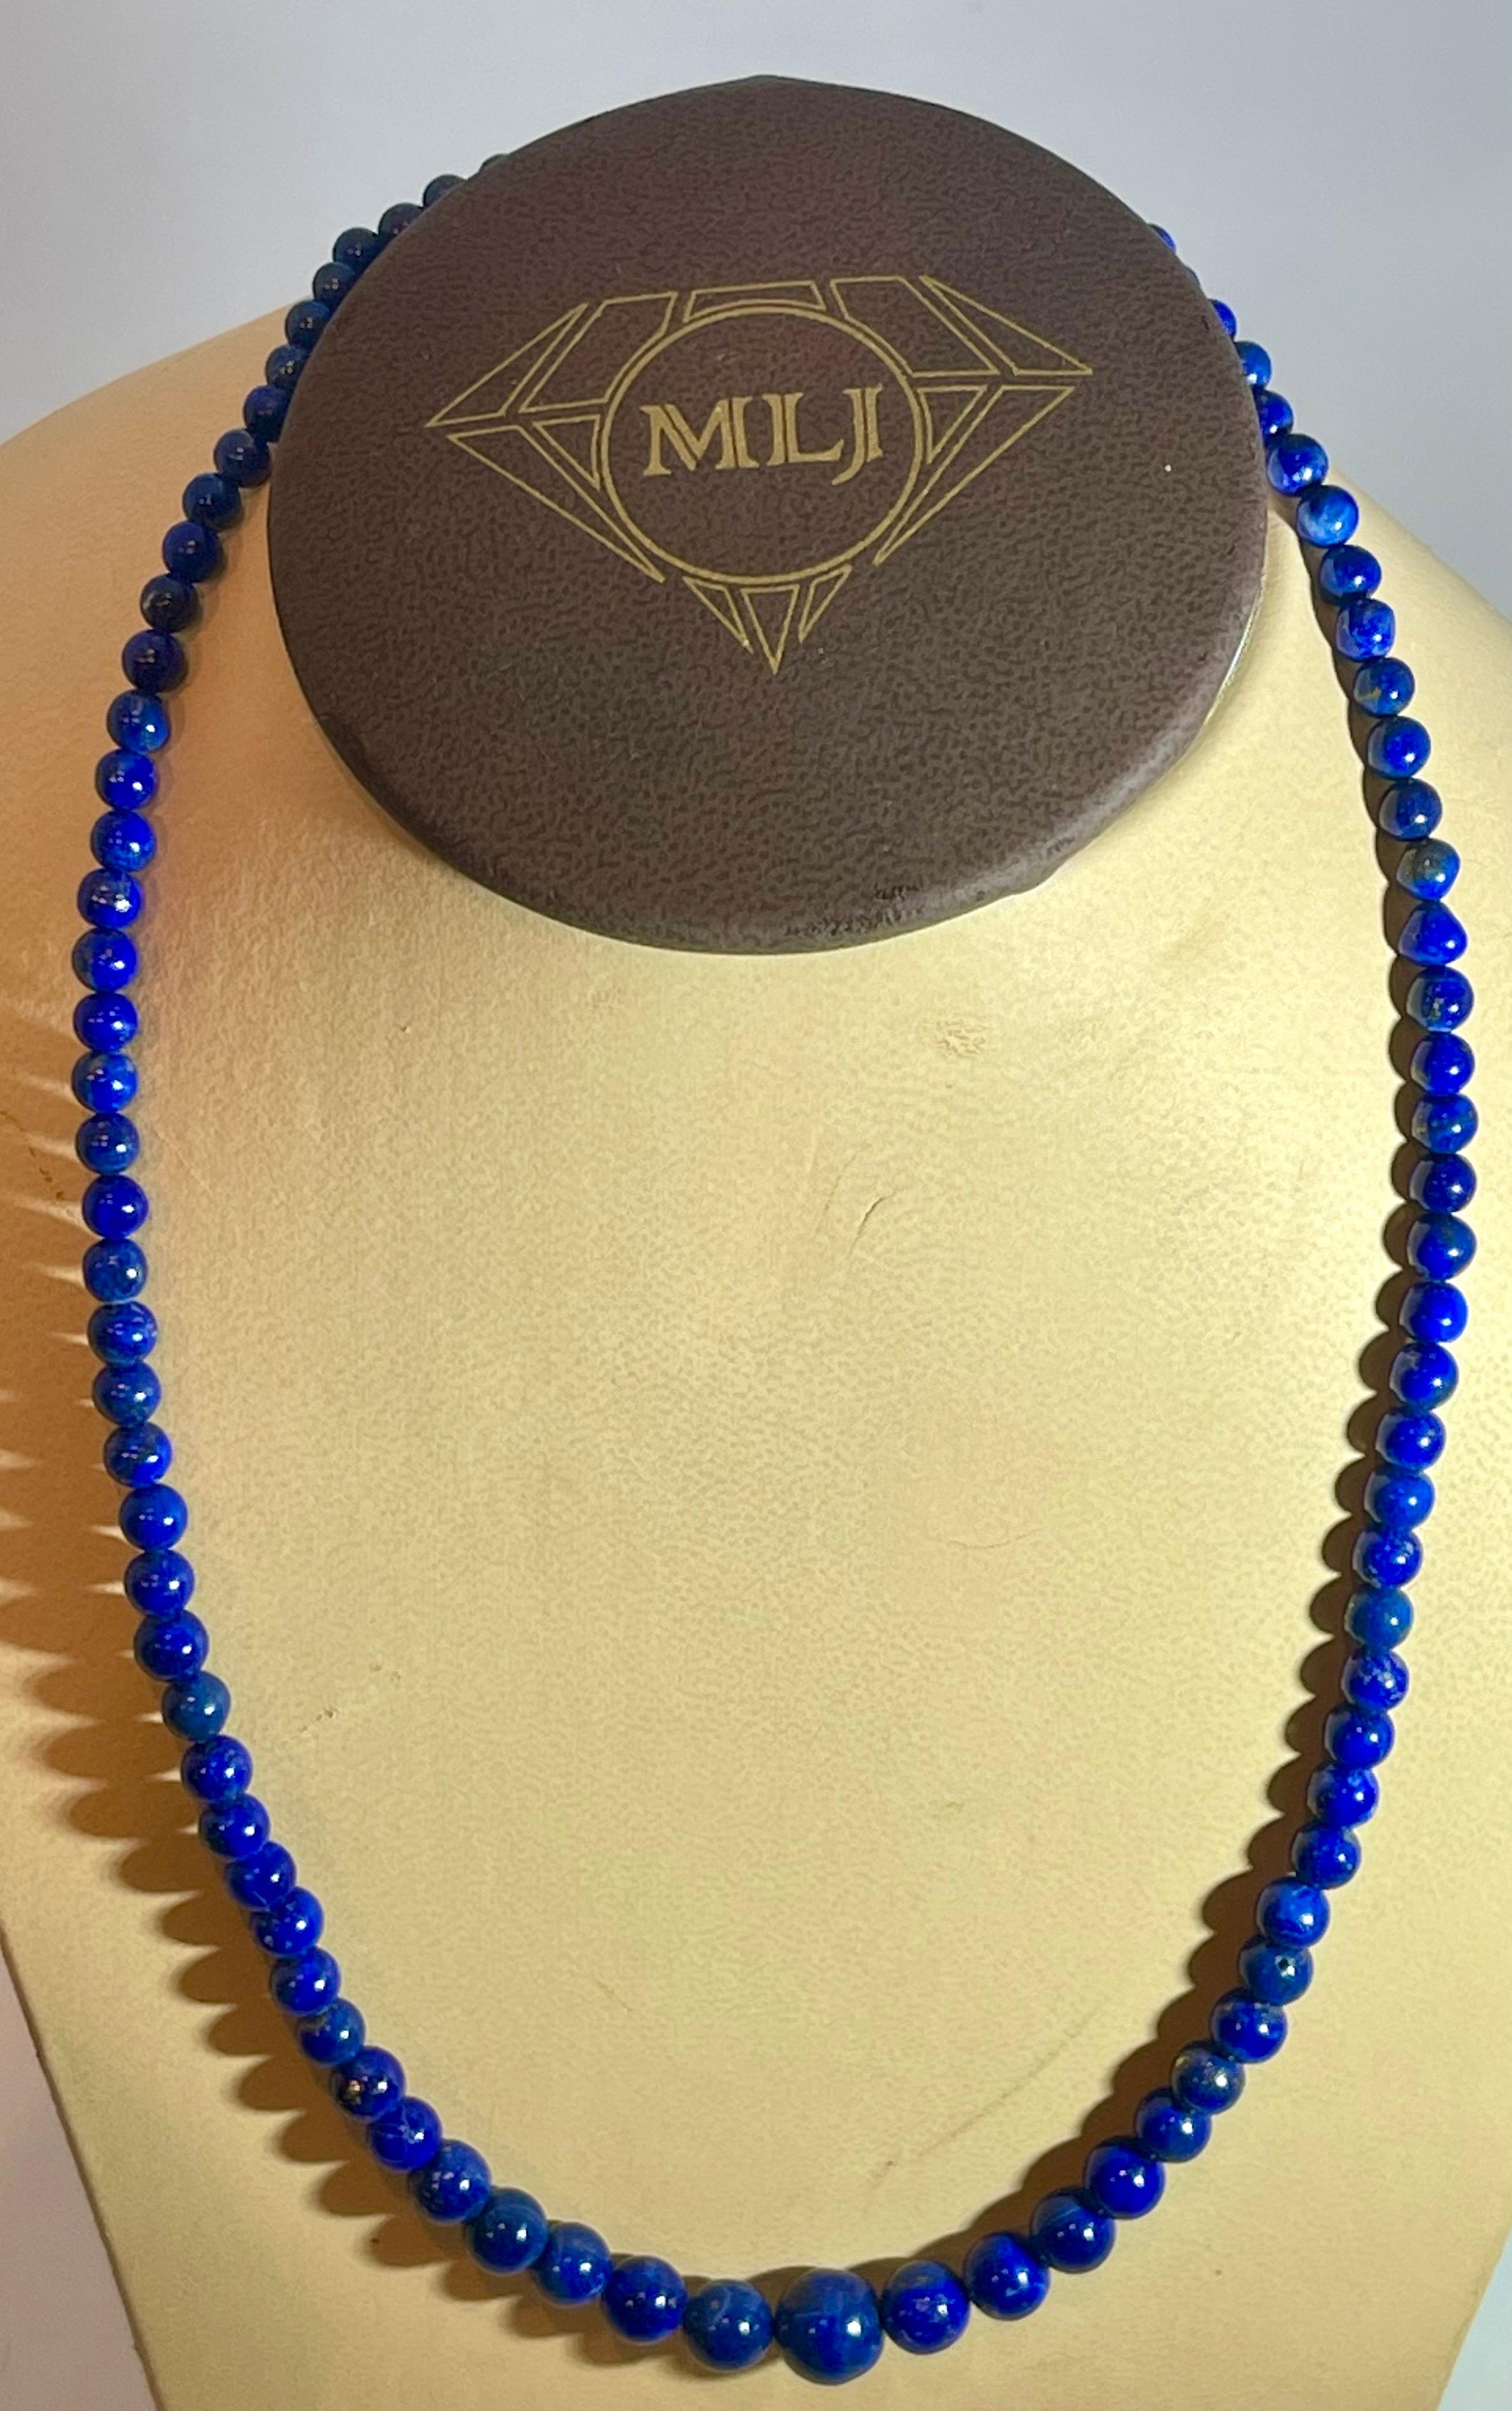 Vintage Lapis Lazuli Single Strand Necklace with 14 Karat Yellow Long Hook Clasp For Sale 7